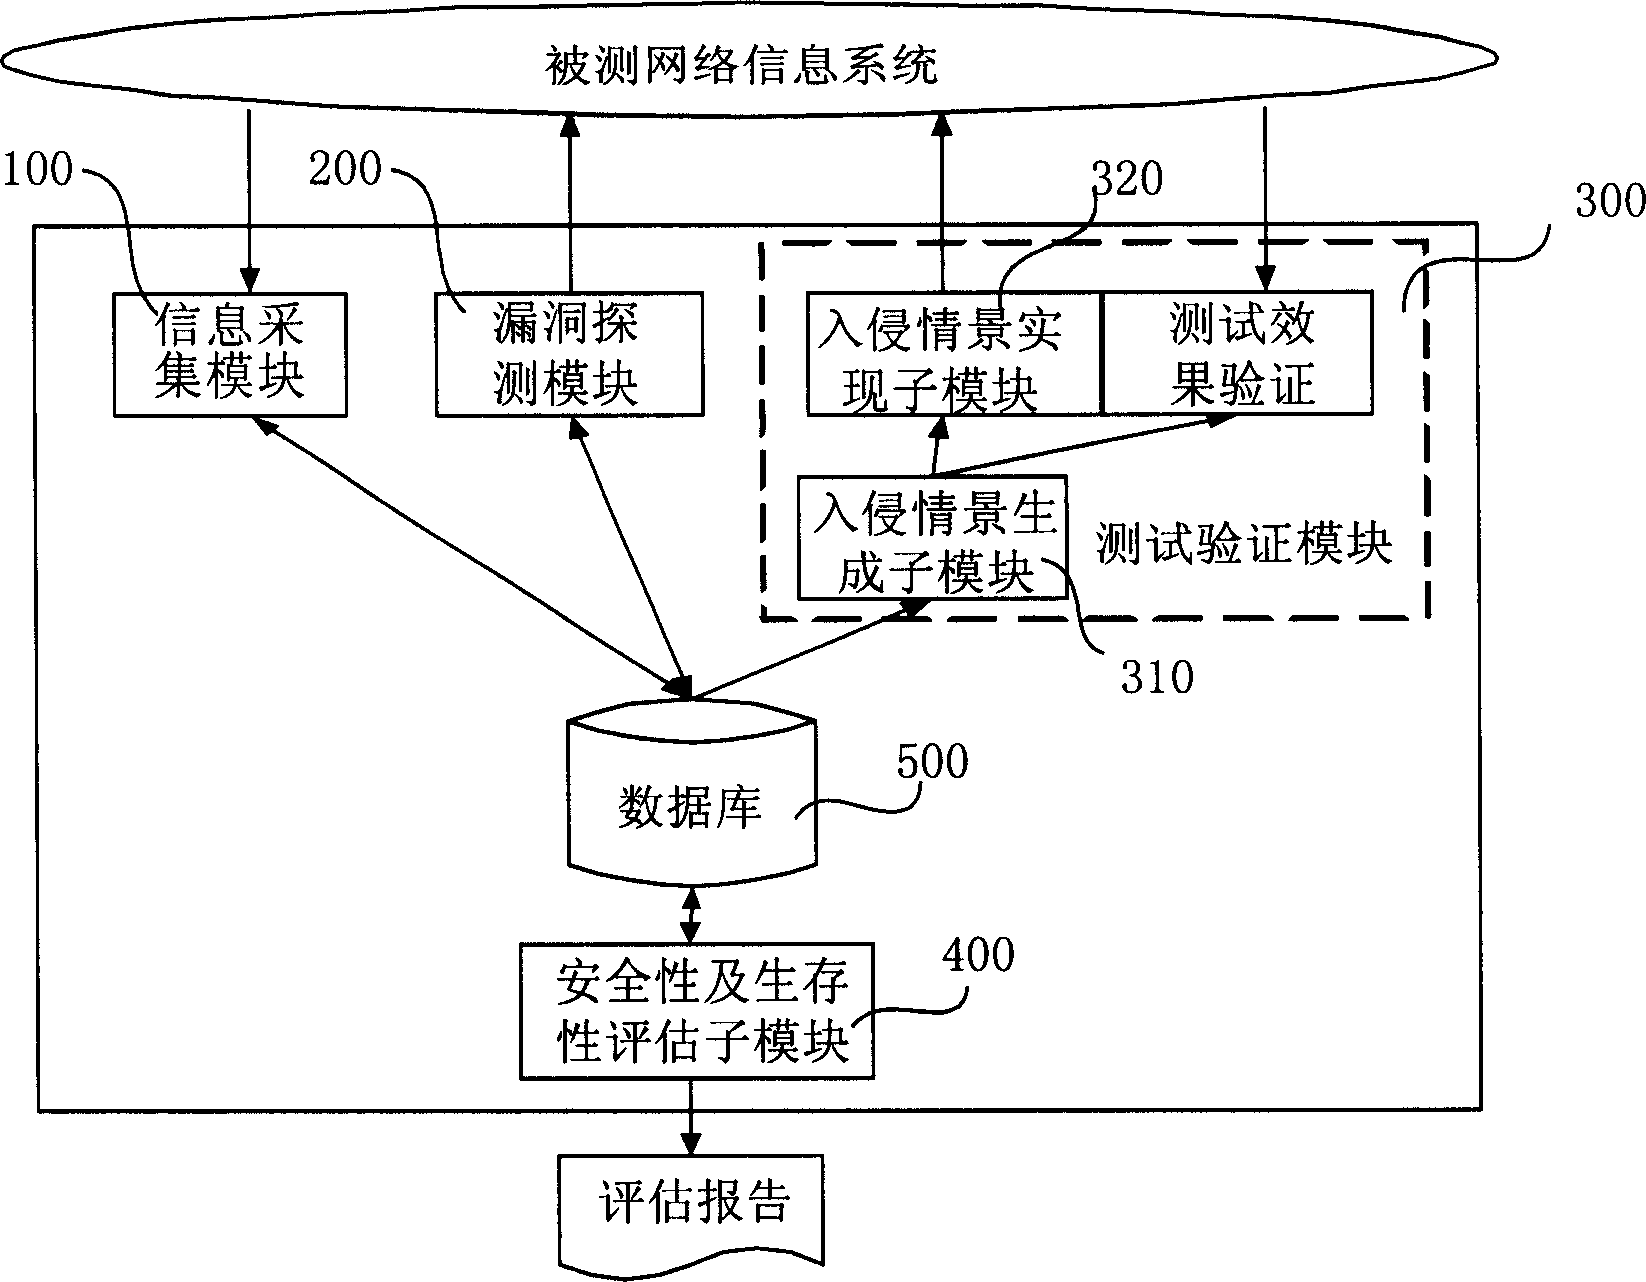 System and method for evaluating security and survivability of network information system